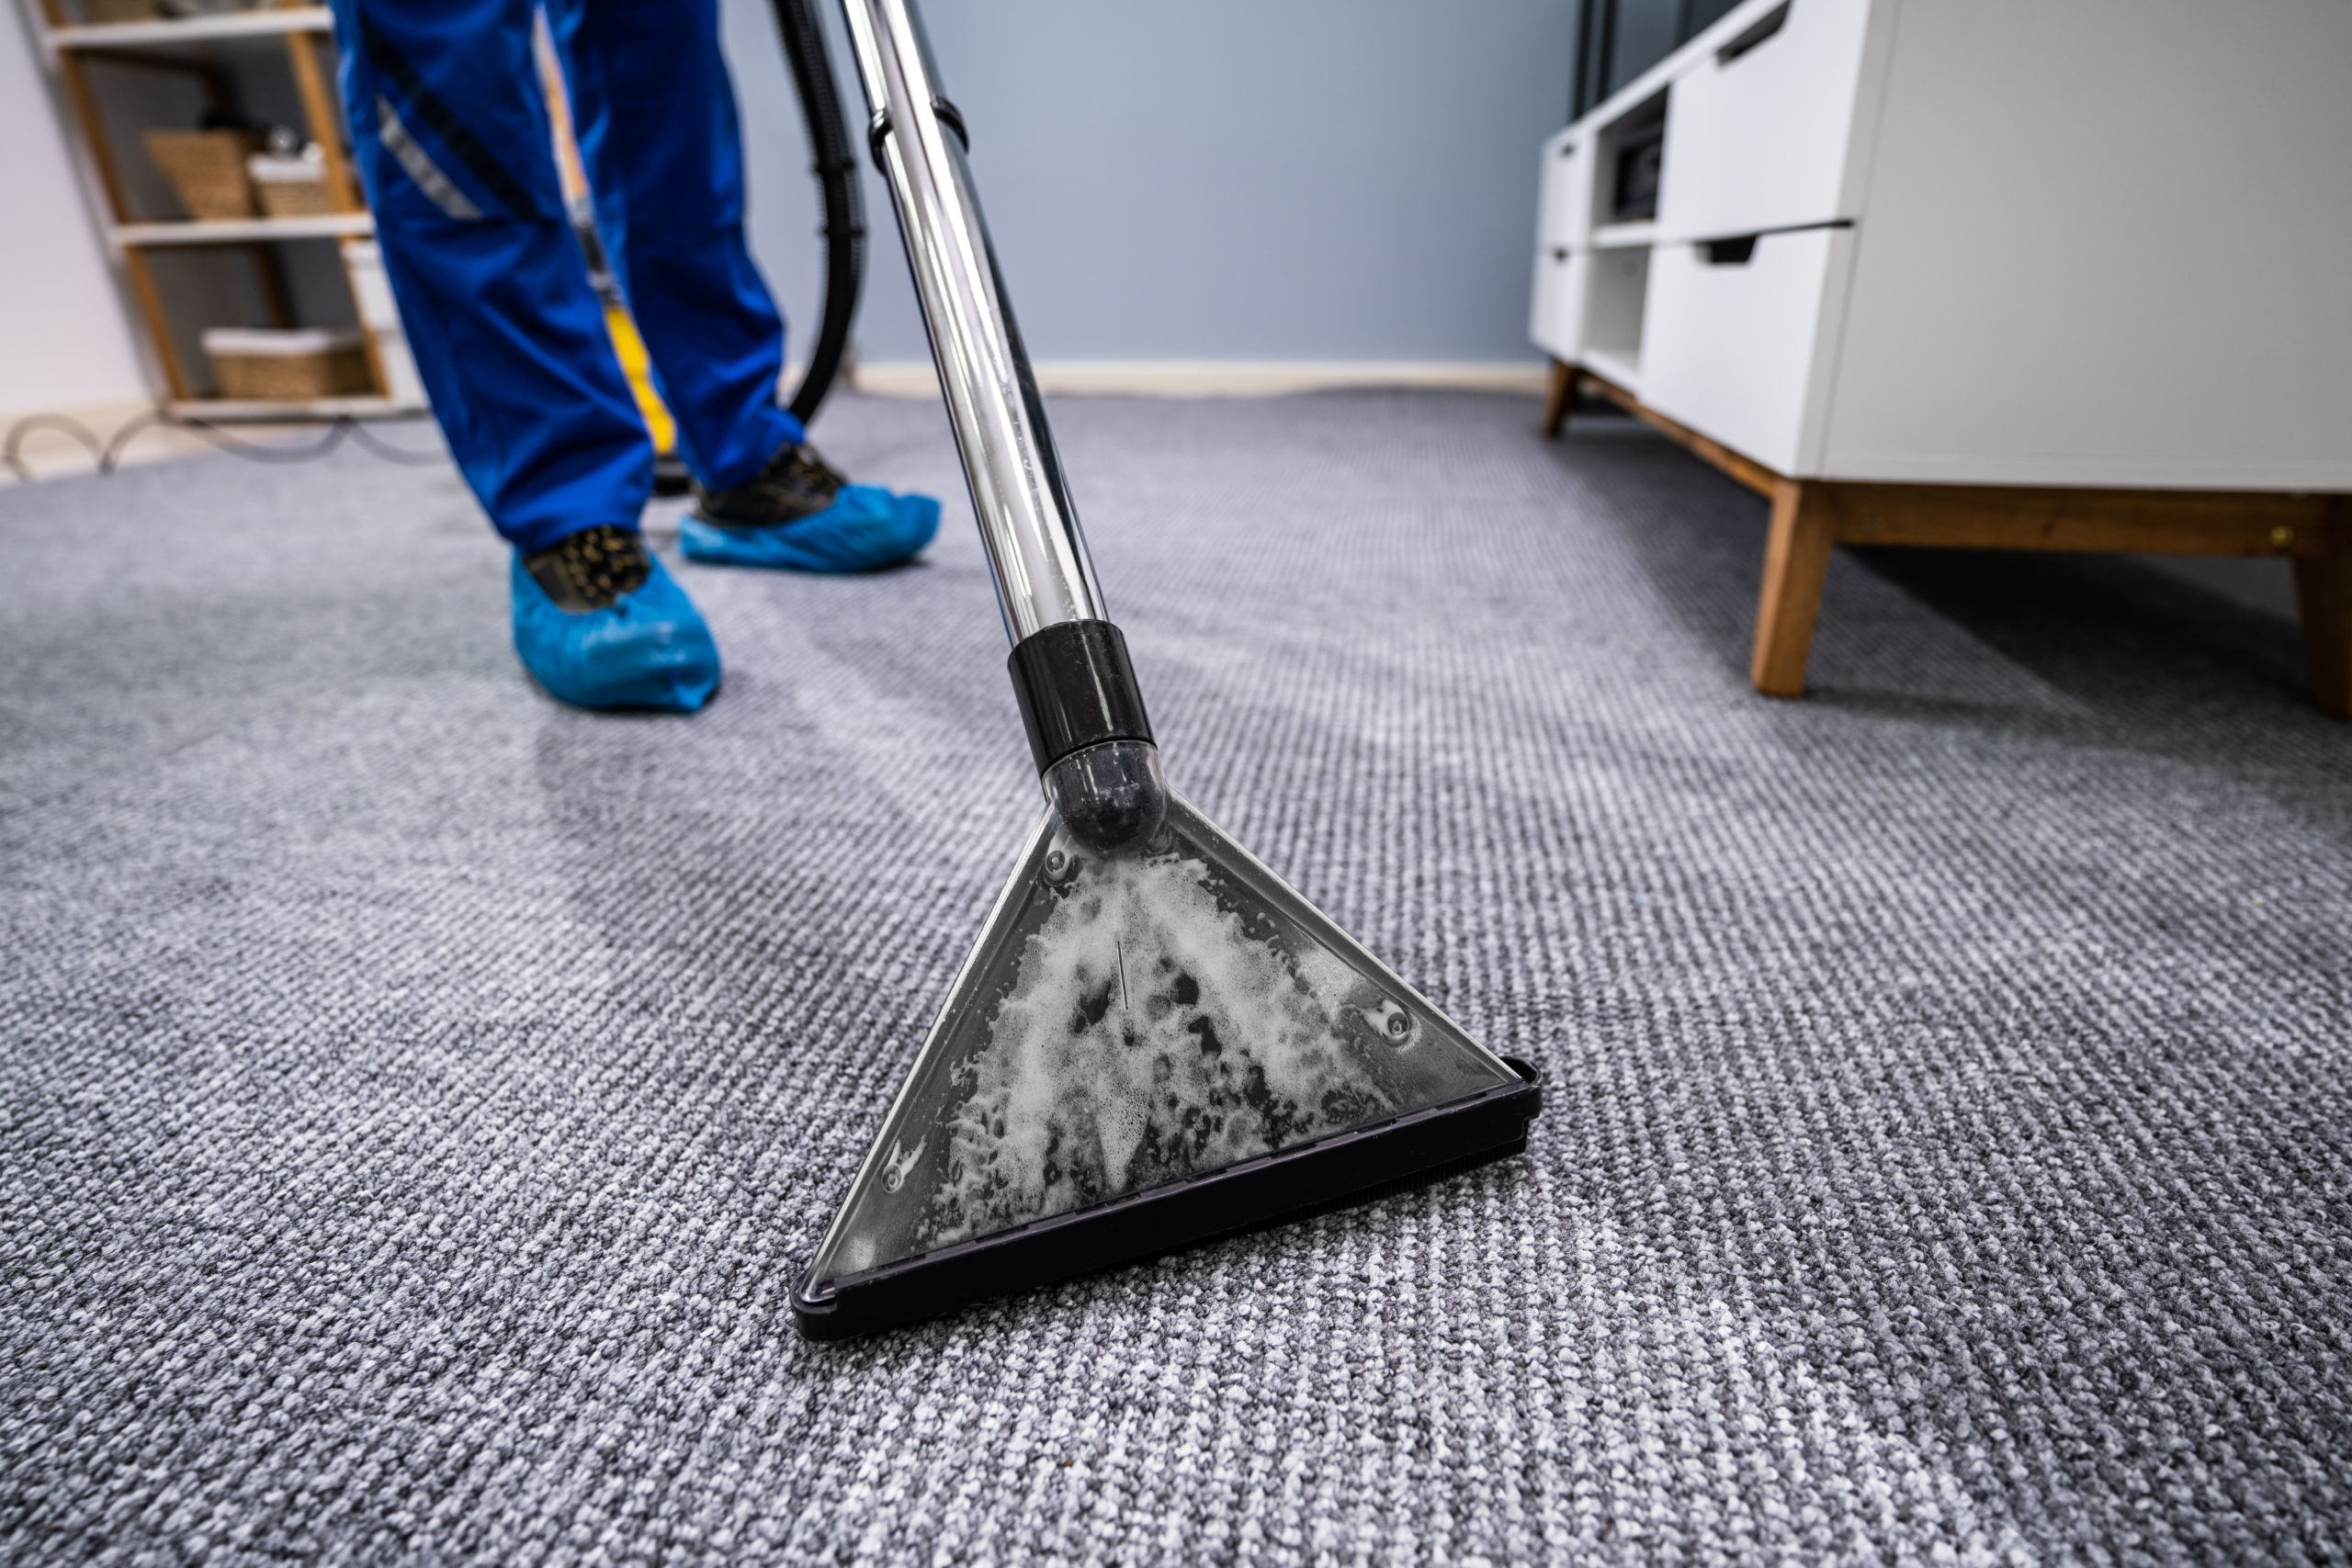 Office Carpet Cleaning Tips for a Super Clean Workplace